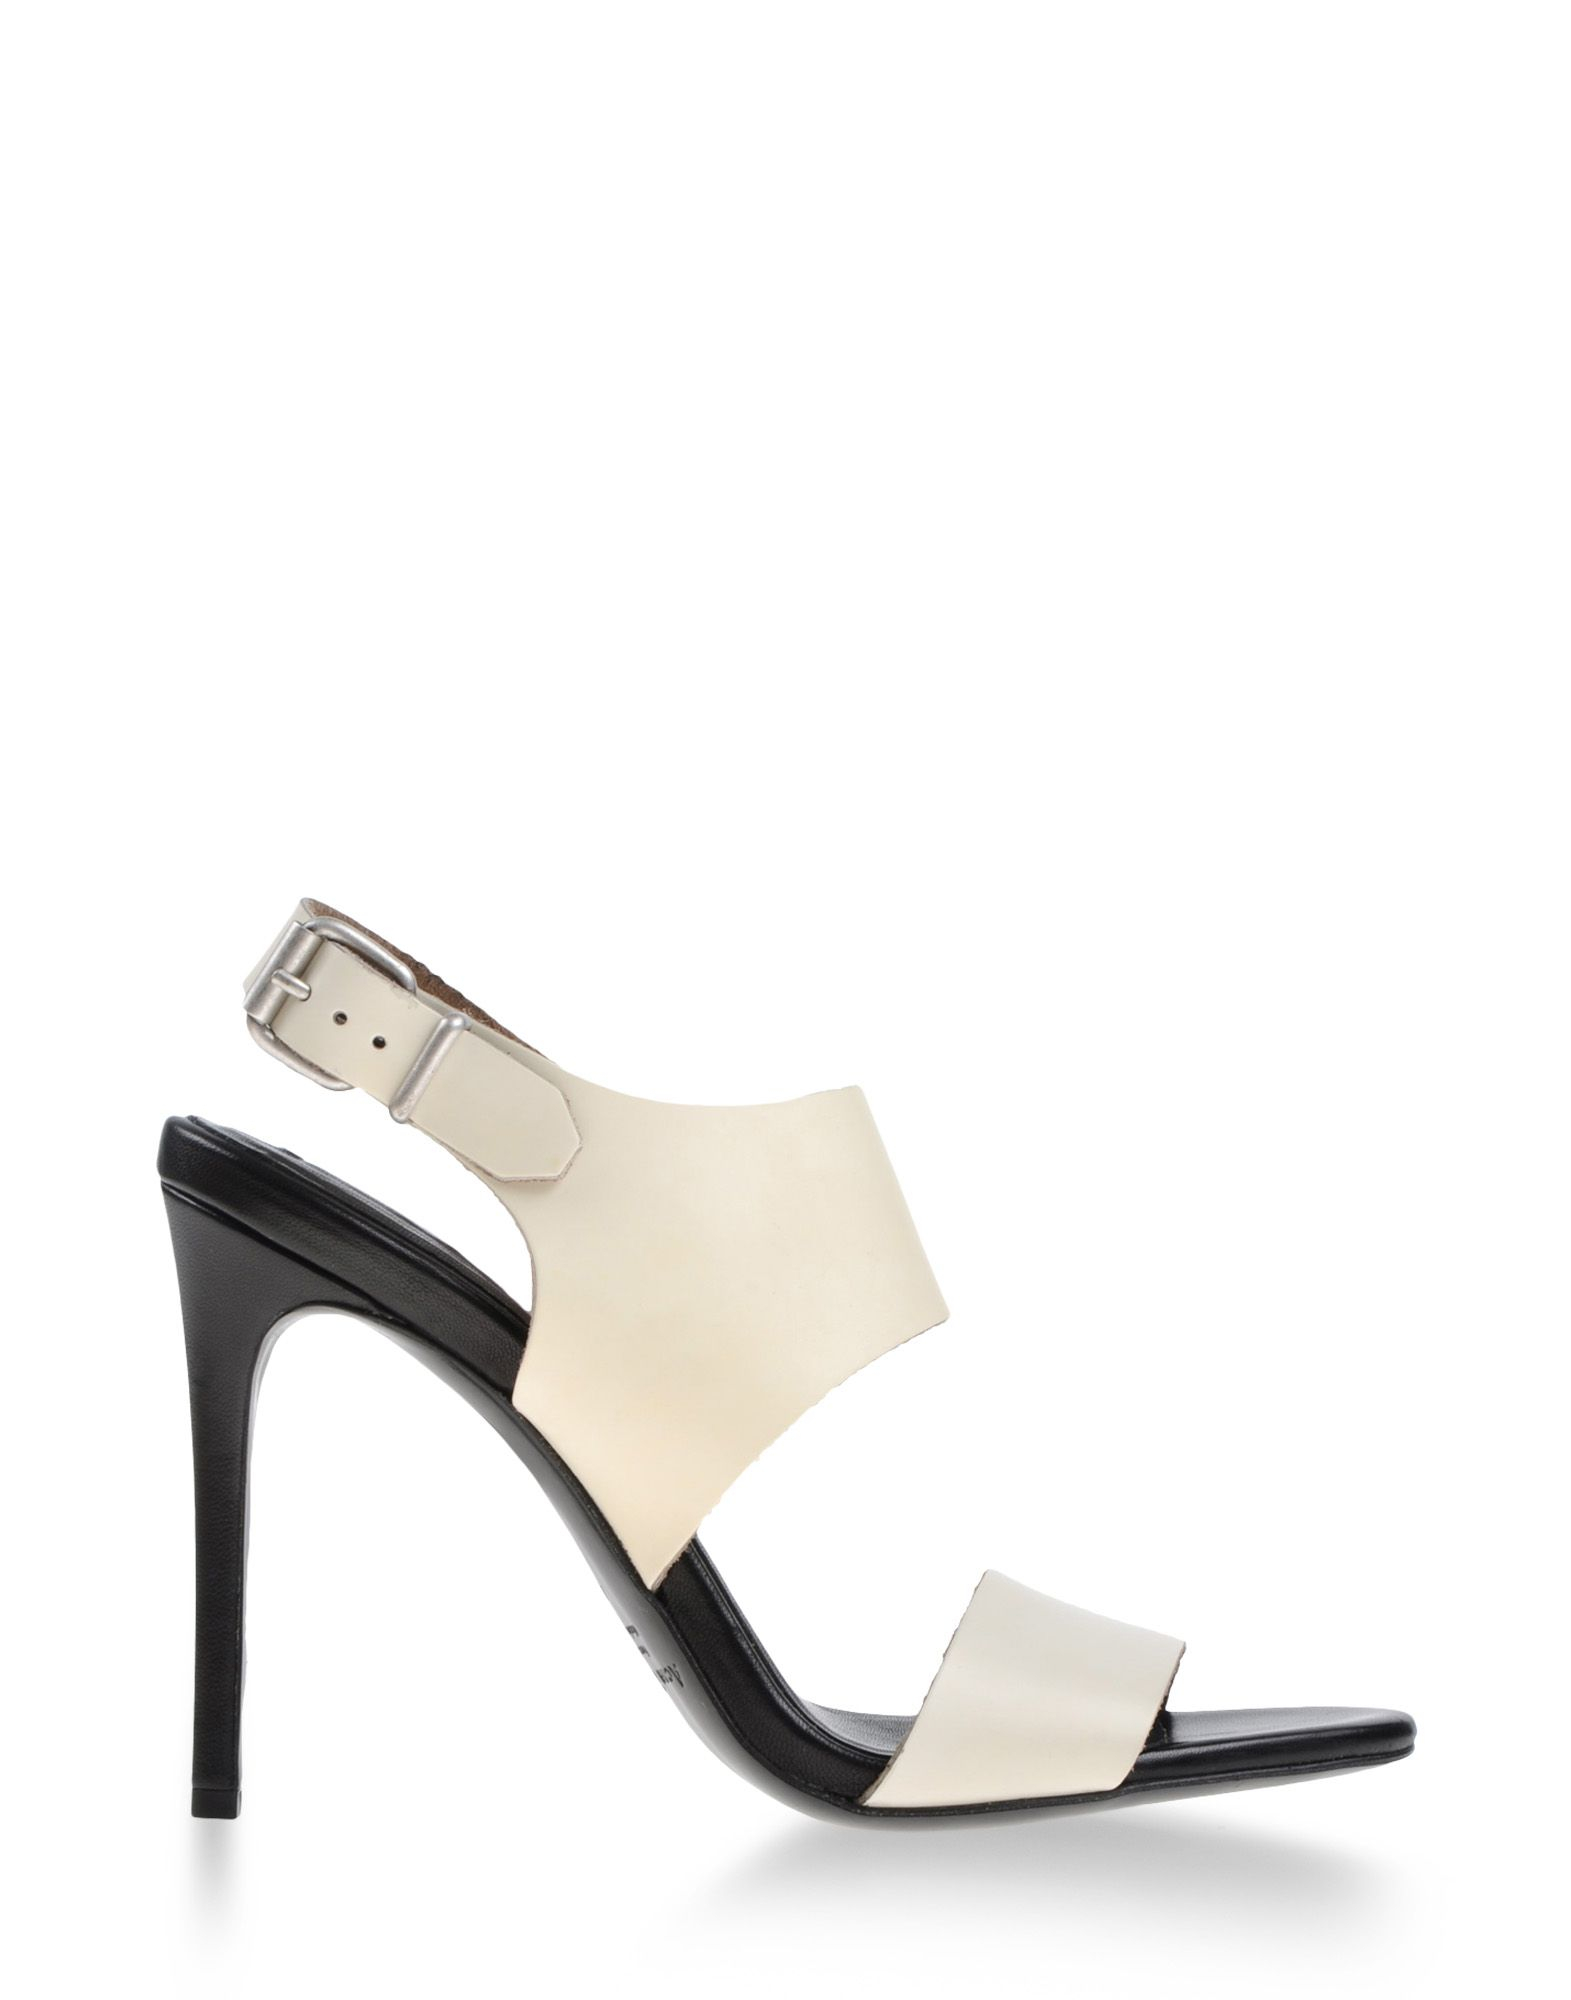 Acne Studios Highheeled Sandals in White (Ivory) | Lyst